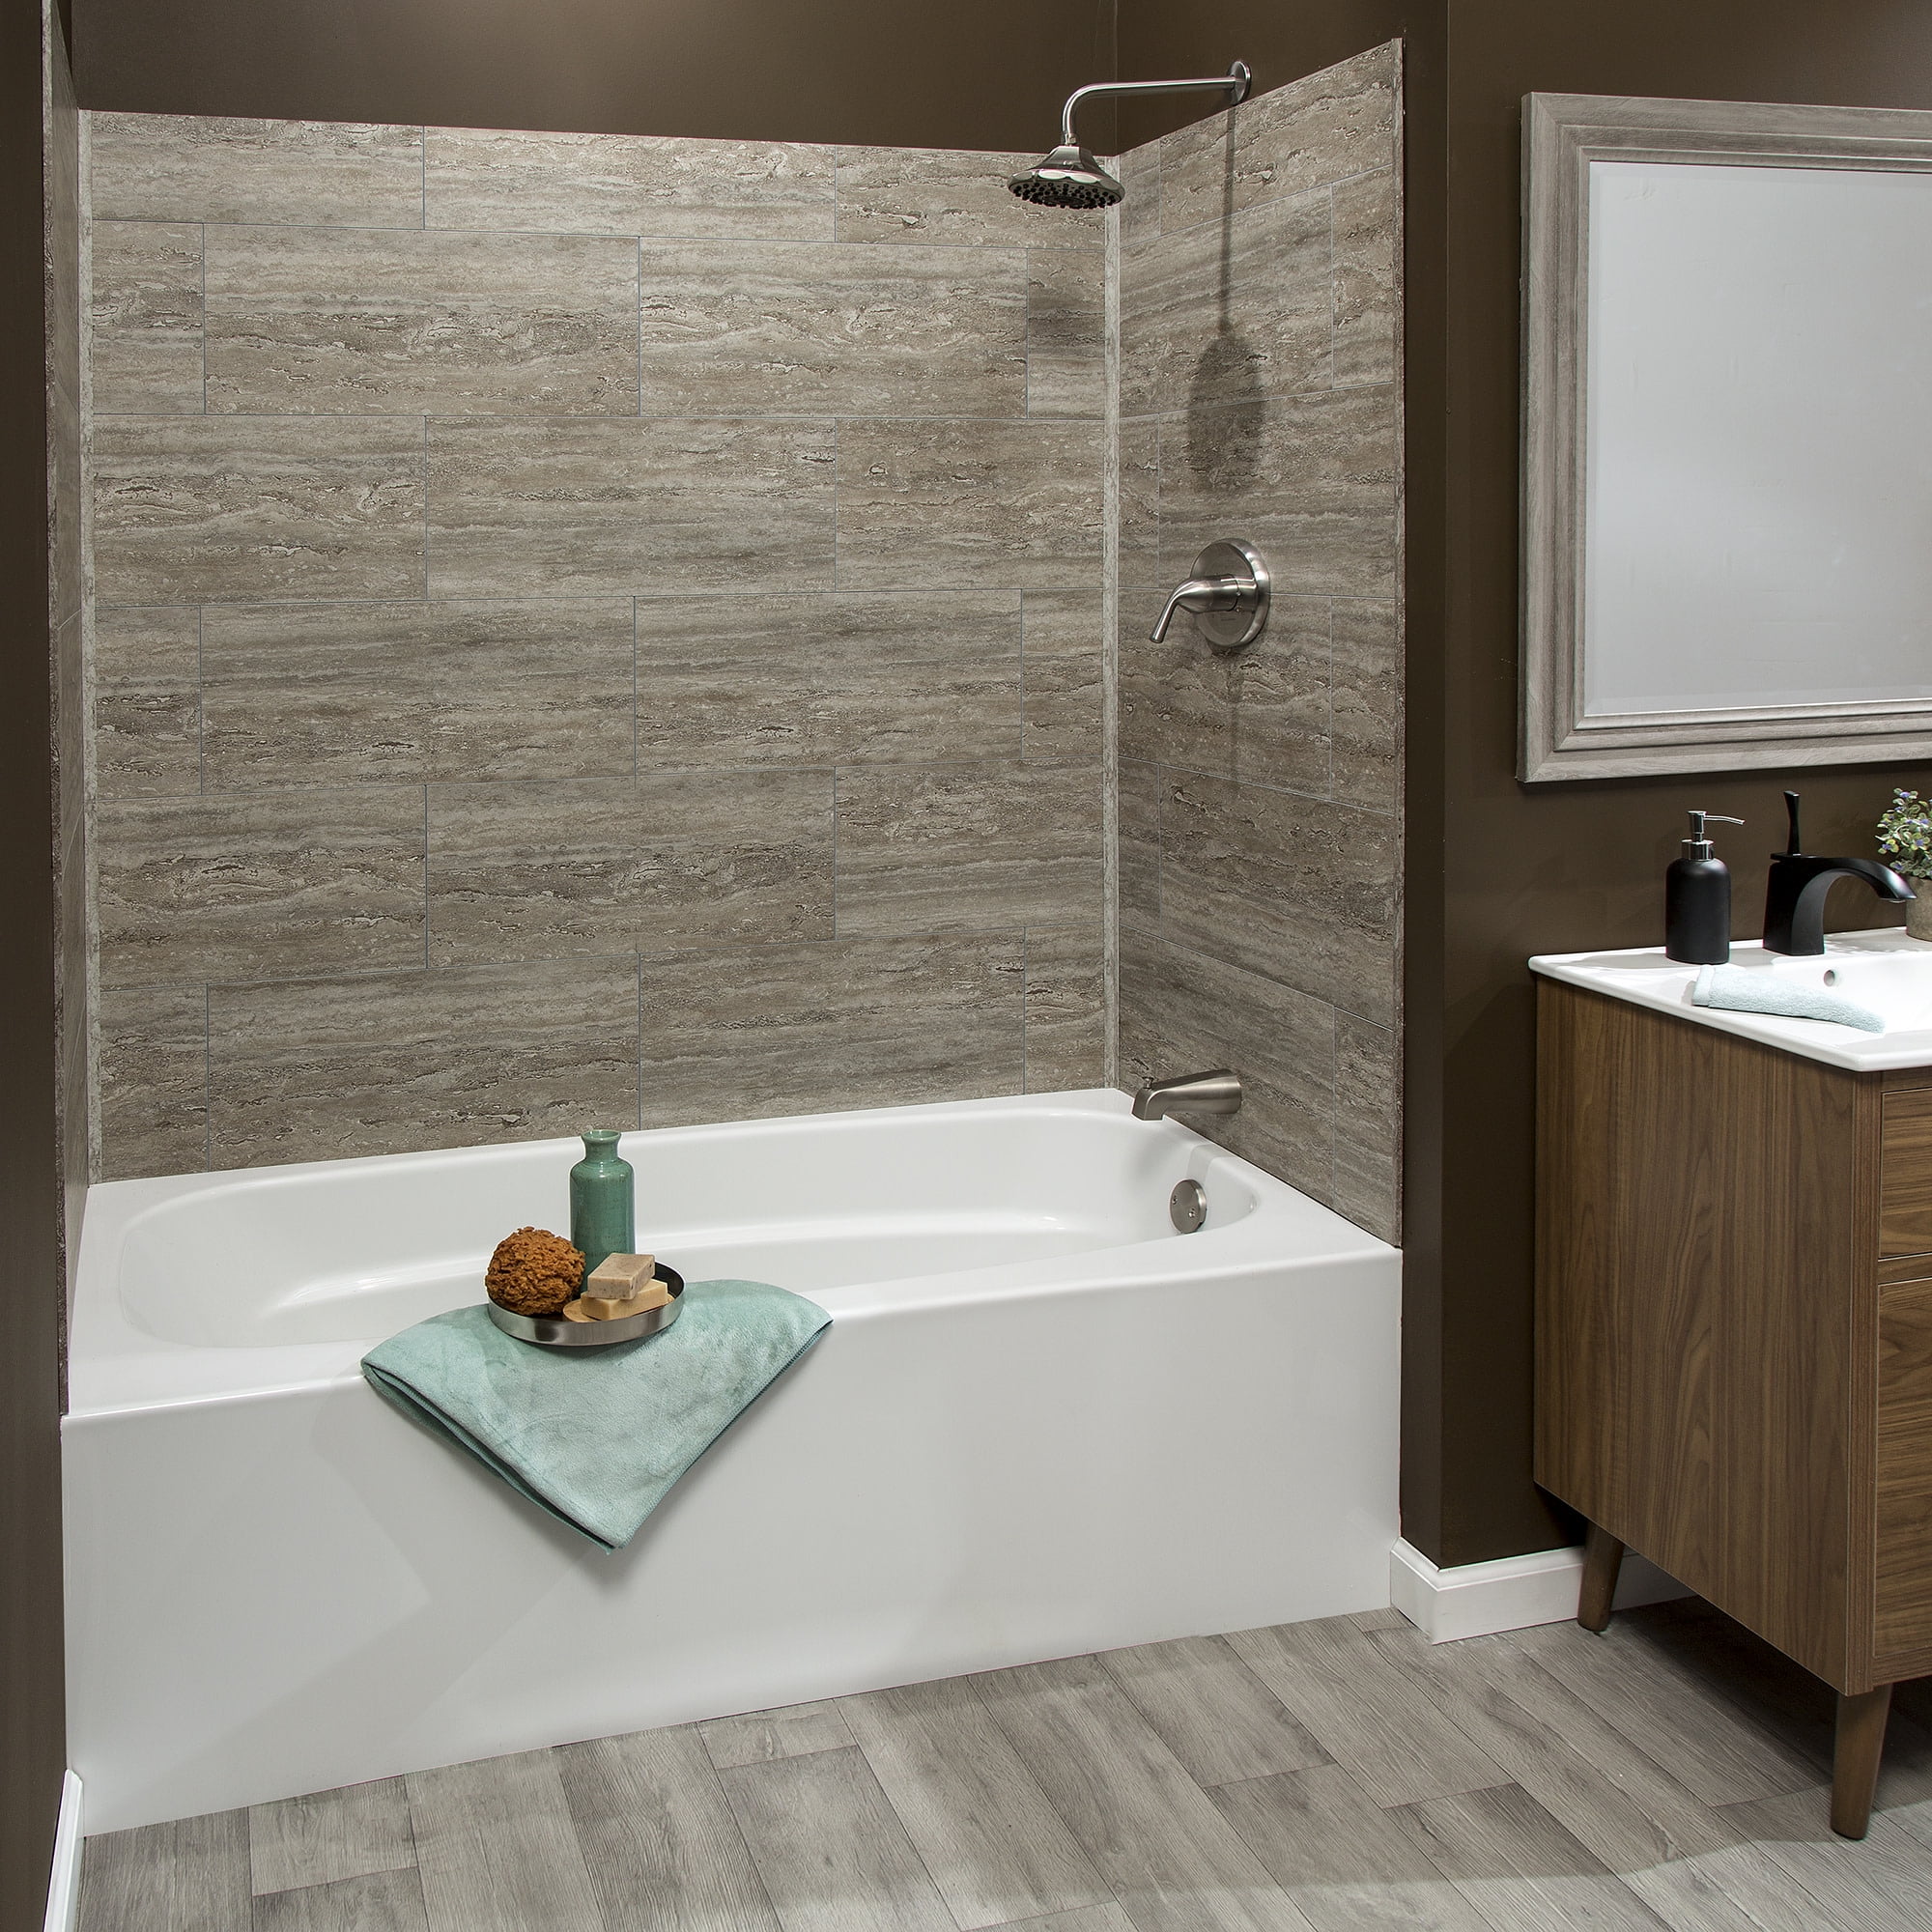 Palisade 23.2 in. x 11.1 in. Interlocking Vinyl Tile Shower and Tub Surround Kit in Grecian Earth